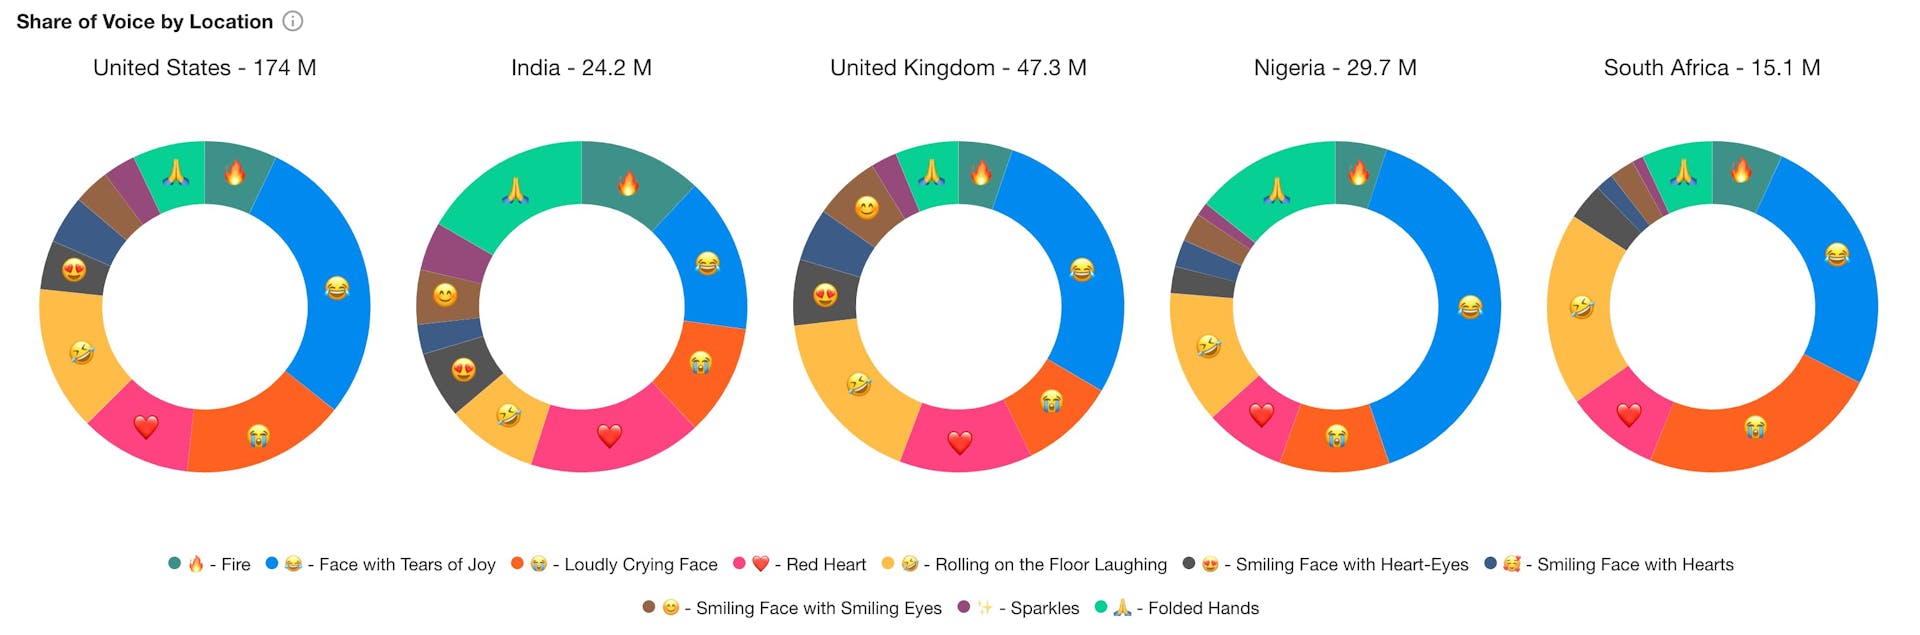 Ring charts showing the shares of voice of emojis in the United States, India, United Kingdom, Nigeria, and South Africa.